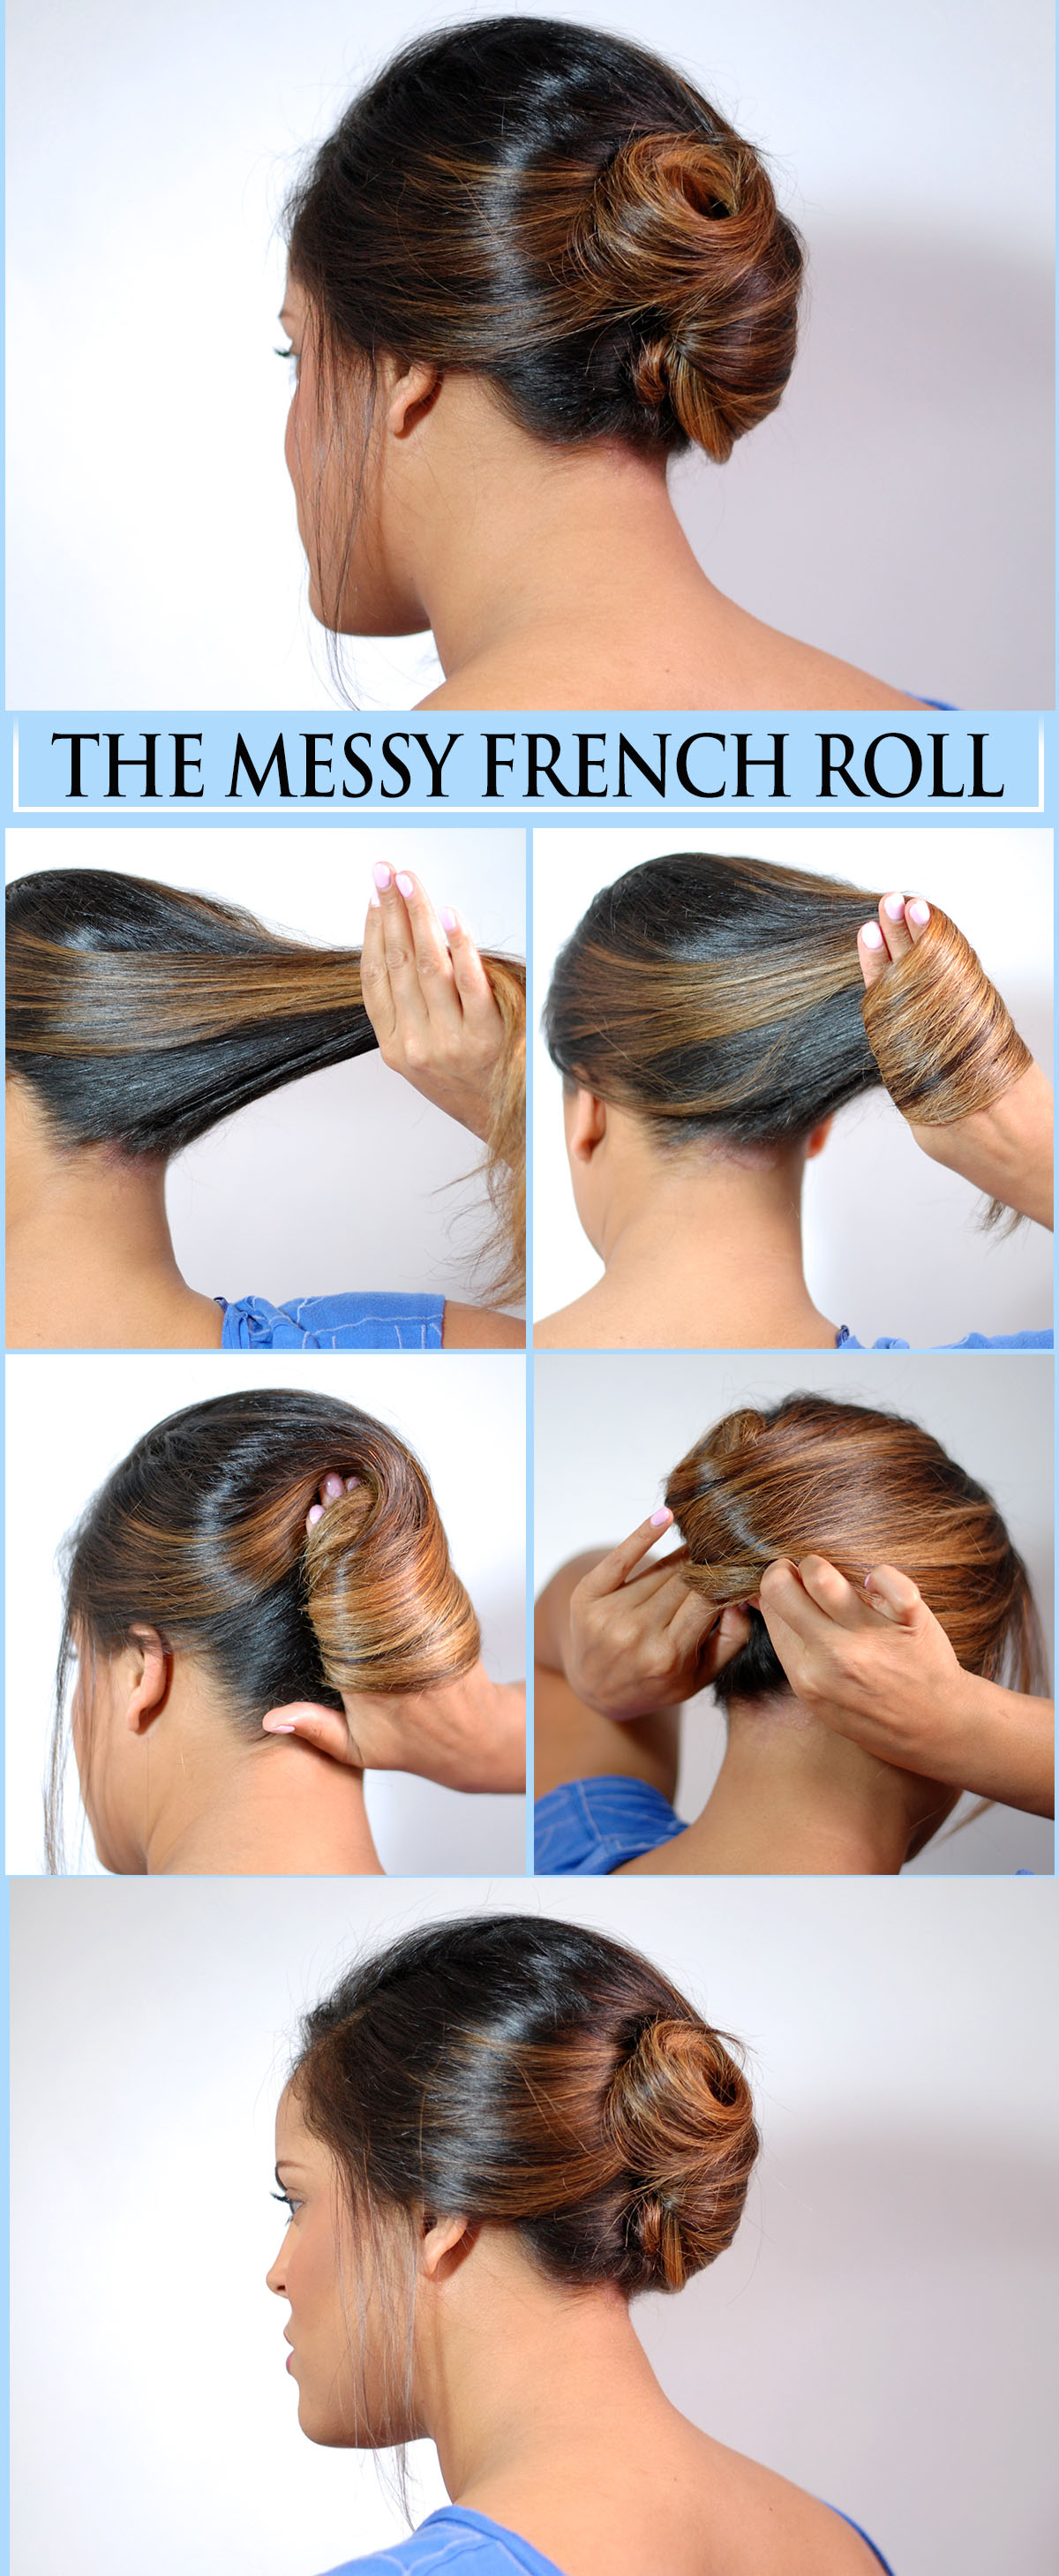 GOTO Beauty: Messy French Roll - Girls Of .